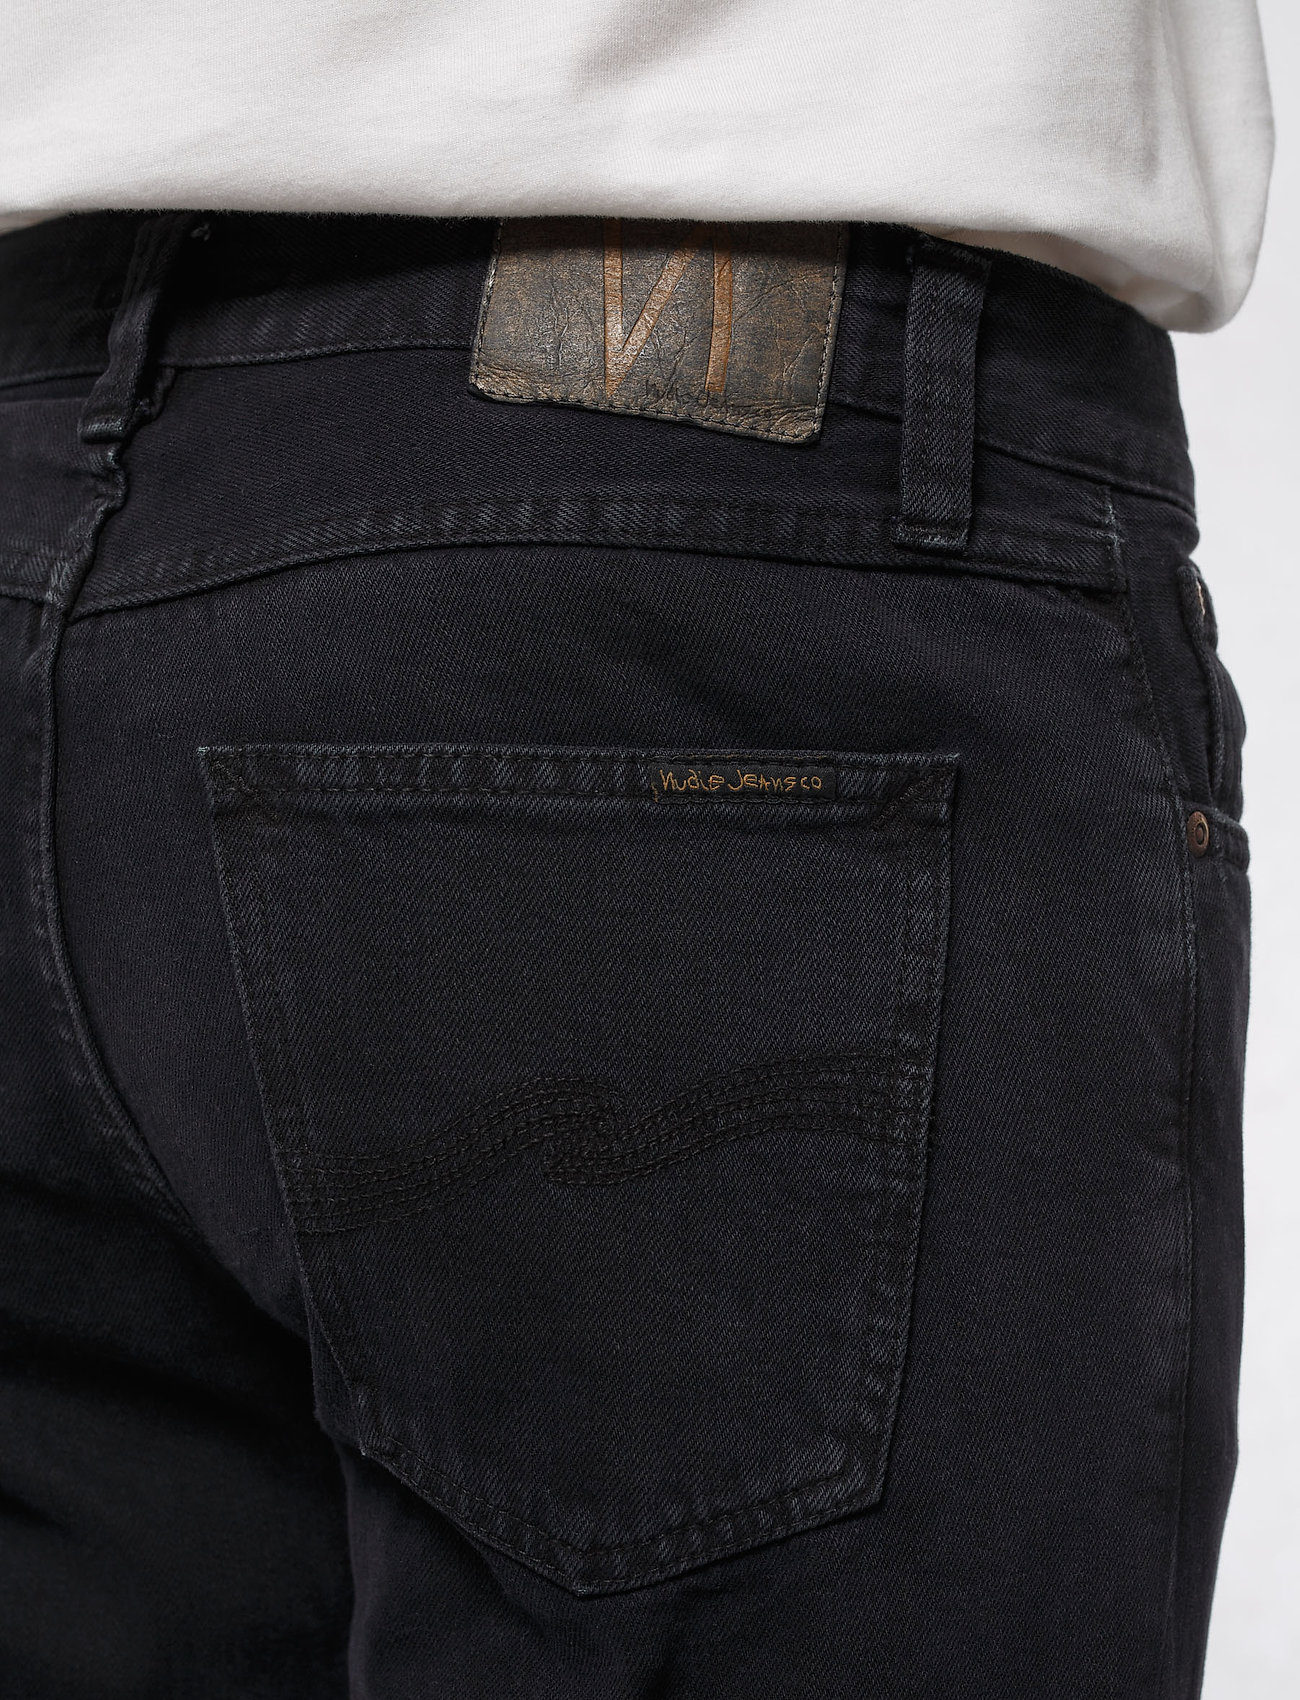 Nudie Jeans - Gritty Jackson - regular jeans - black forest - 4